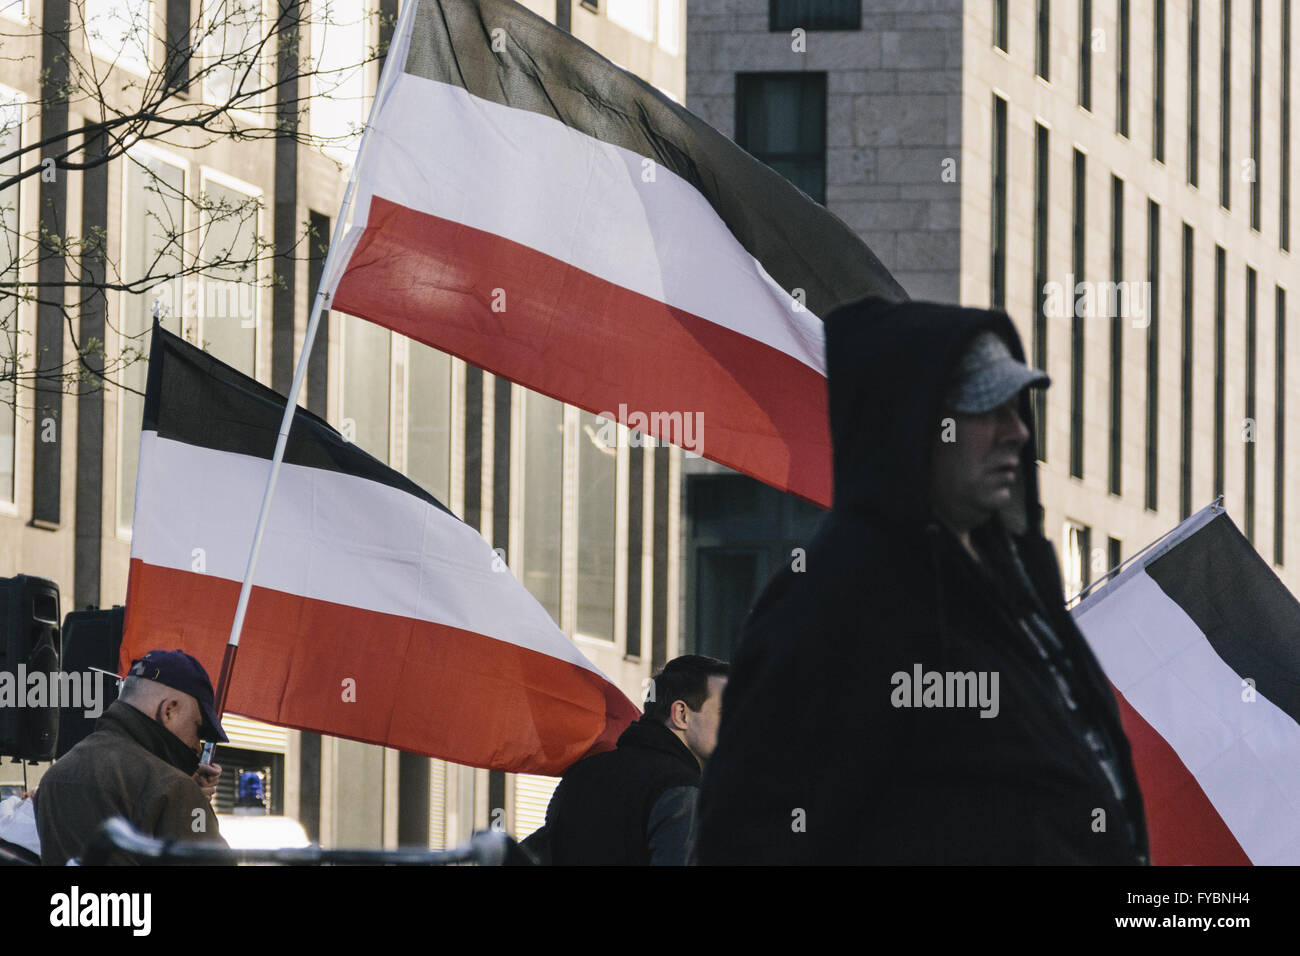 Berlin, Berlin, Germany. 25th Apr, 2016. Protesters waving flags with the national colors of the German Empire during the right-wing Baergida Rally in front of Berlin Central Station. Baergida, an Anti-Islamic, anti-immigration, far-right movement meet for the 69th time since their first rally in January 2015. © Jan Scheunert/ZUMA Wire/Alamy Live News Stock Photo